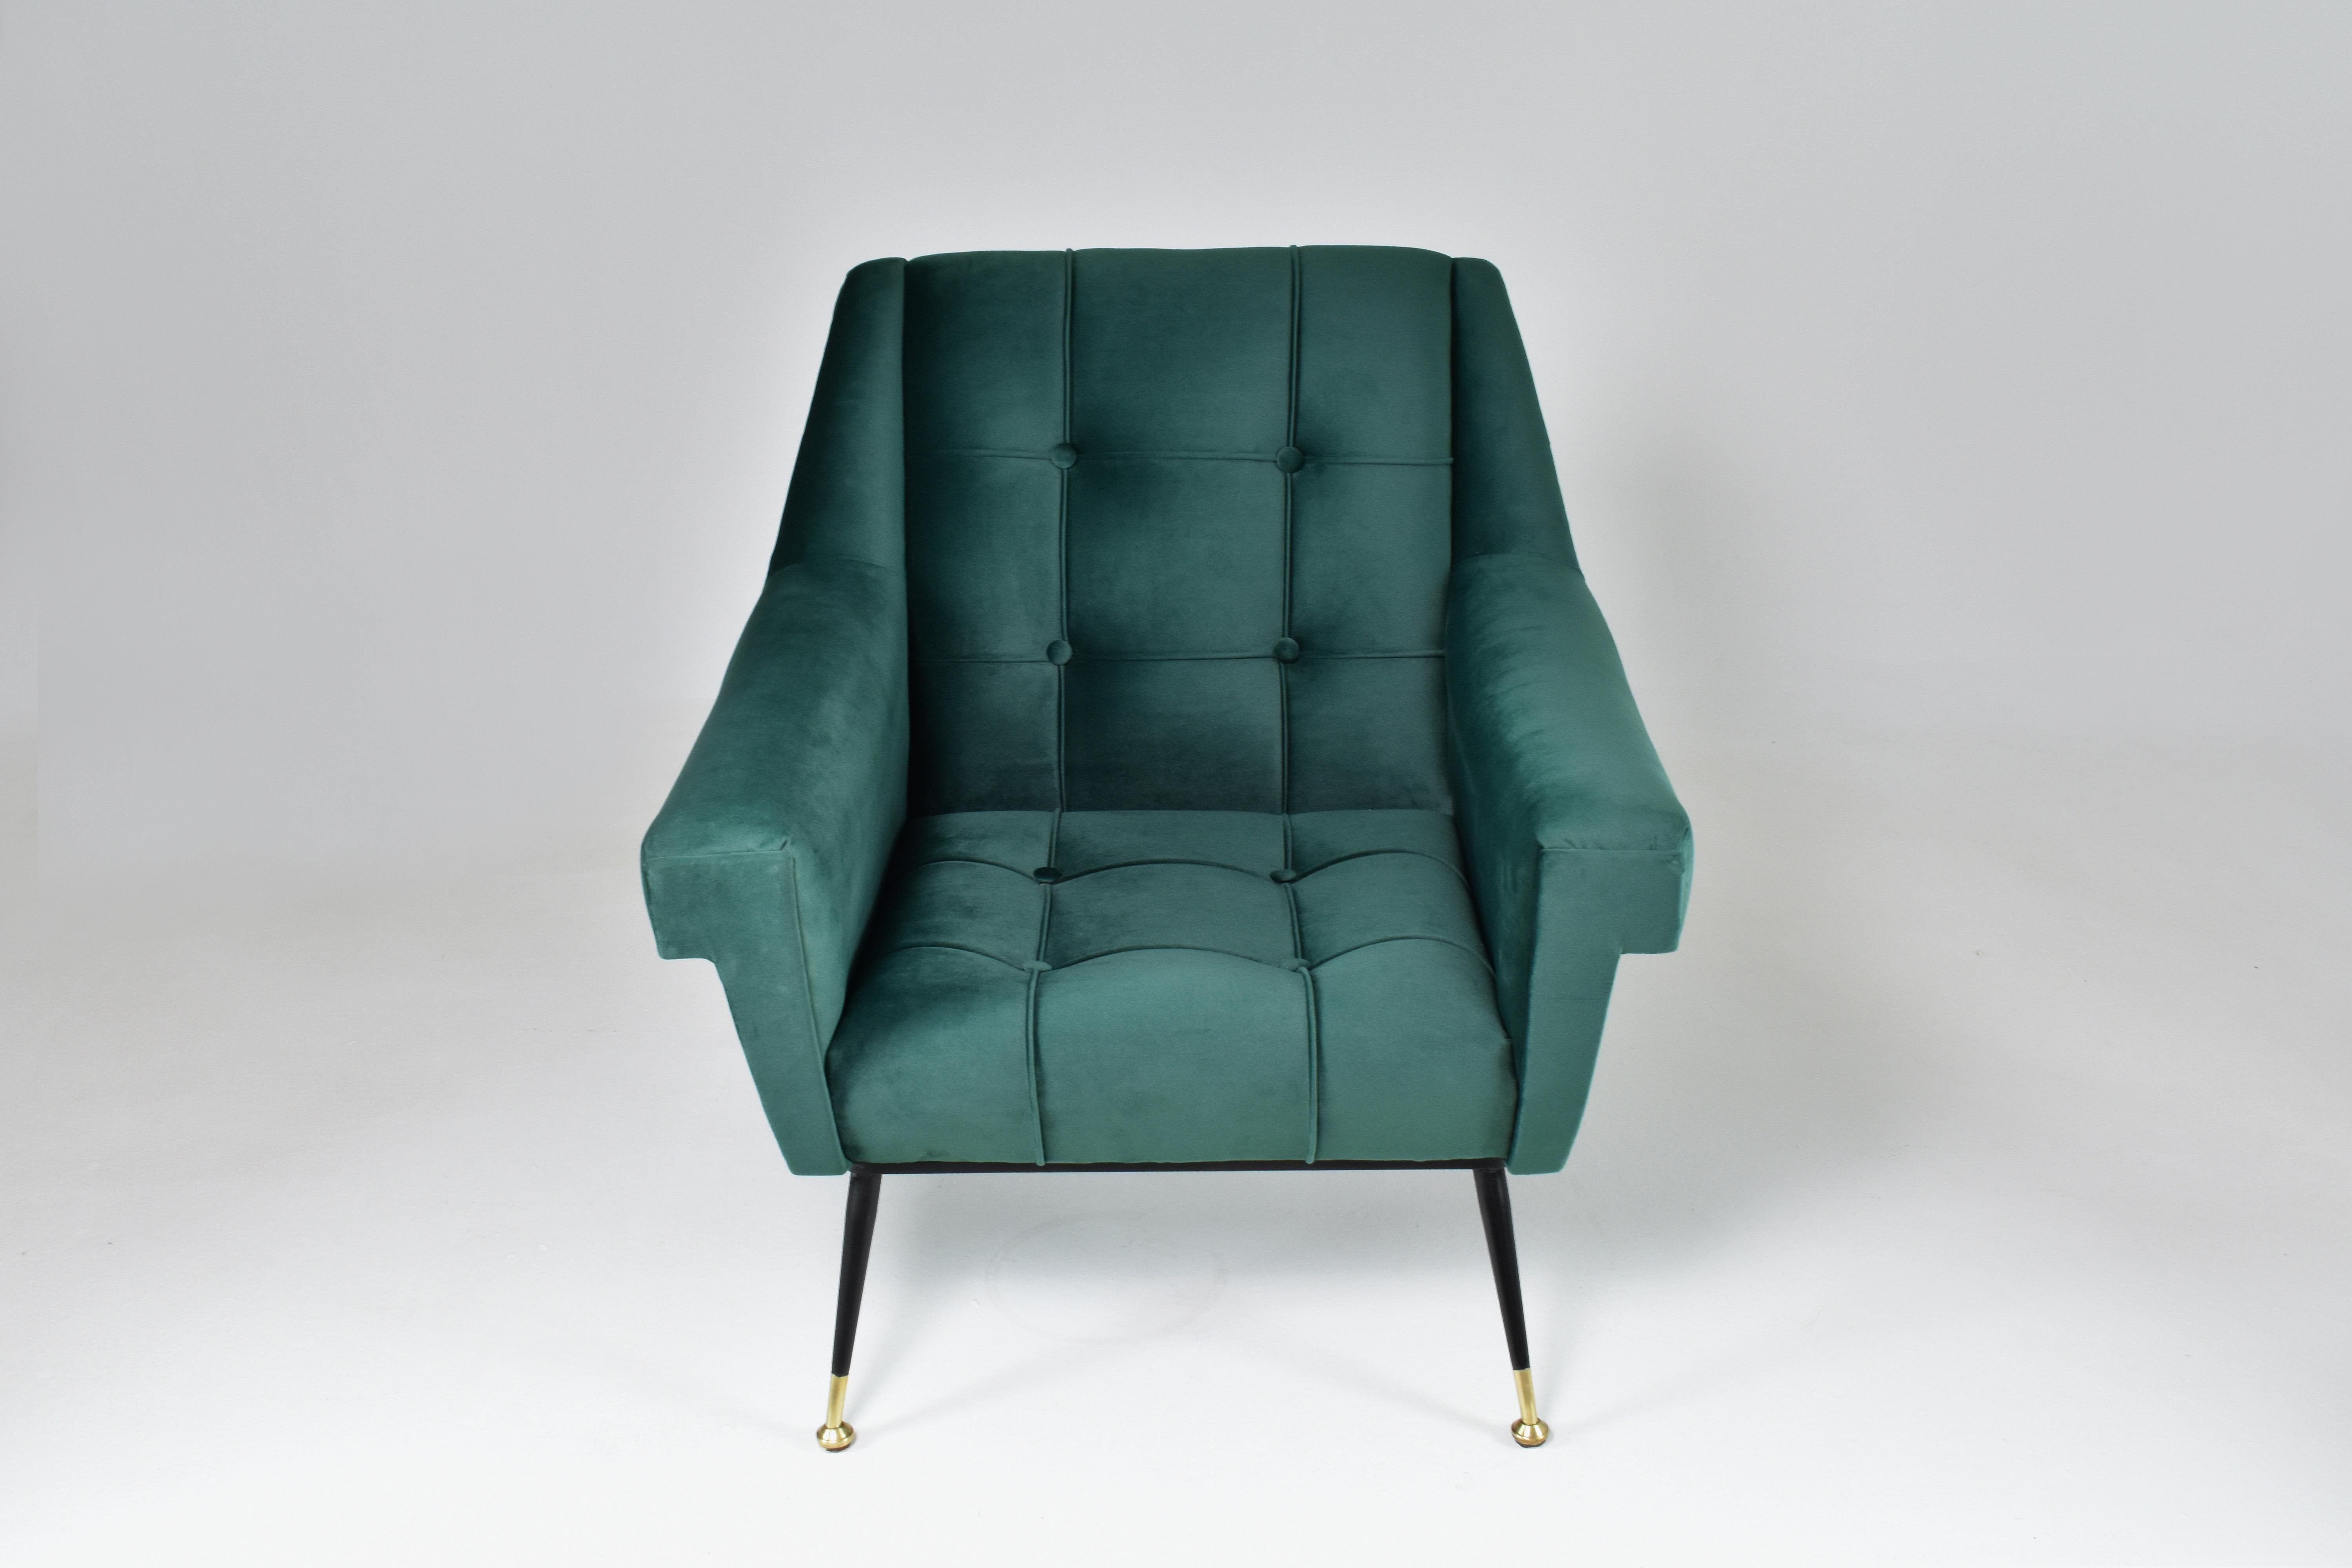 A masterfully restored Italian Mid-Century Modern armchair designed by typical angular seating and slim played and tapered legs with sophisticated brass endings. Fully rupholstered with new foam padding in a royal green quilted velvet fabric.